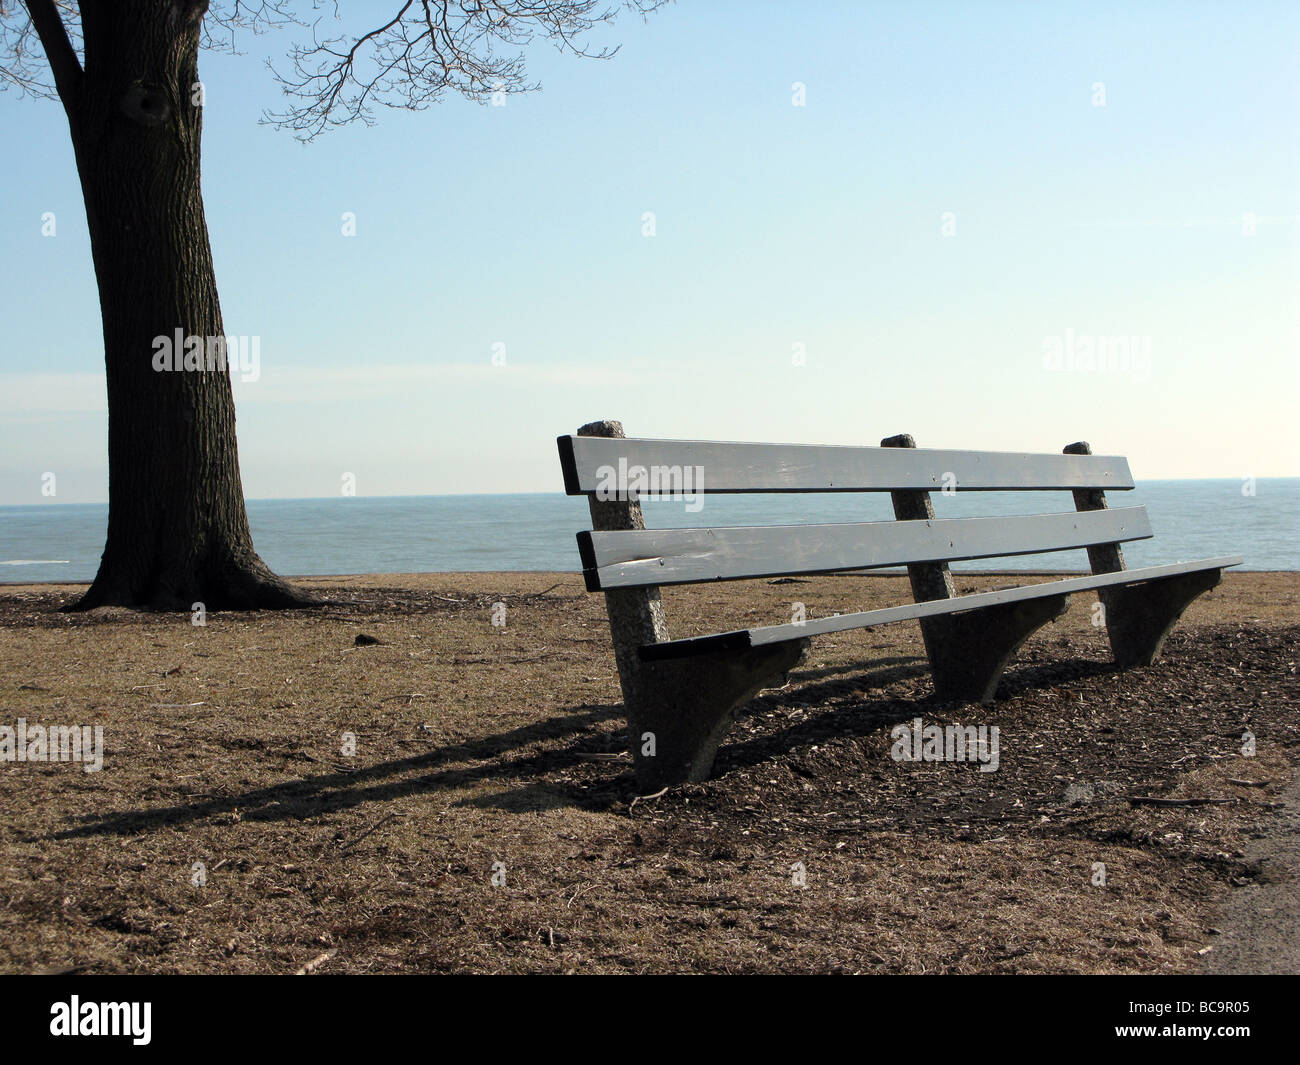 Lake Michigan with tree and bench, Chicago, Illinois Stock Photo